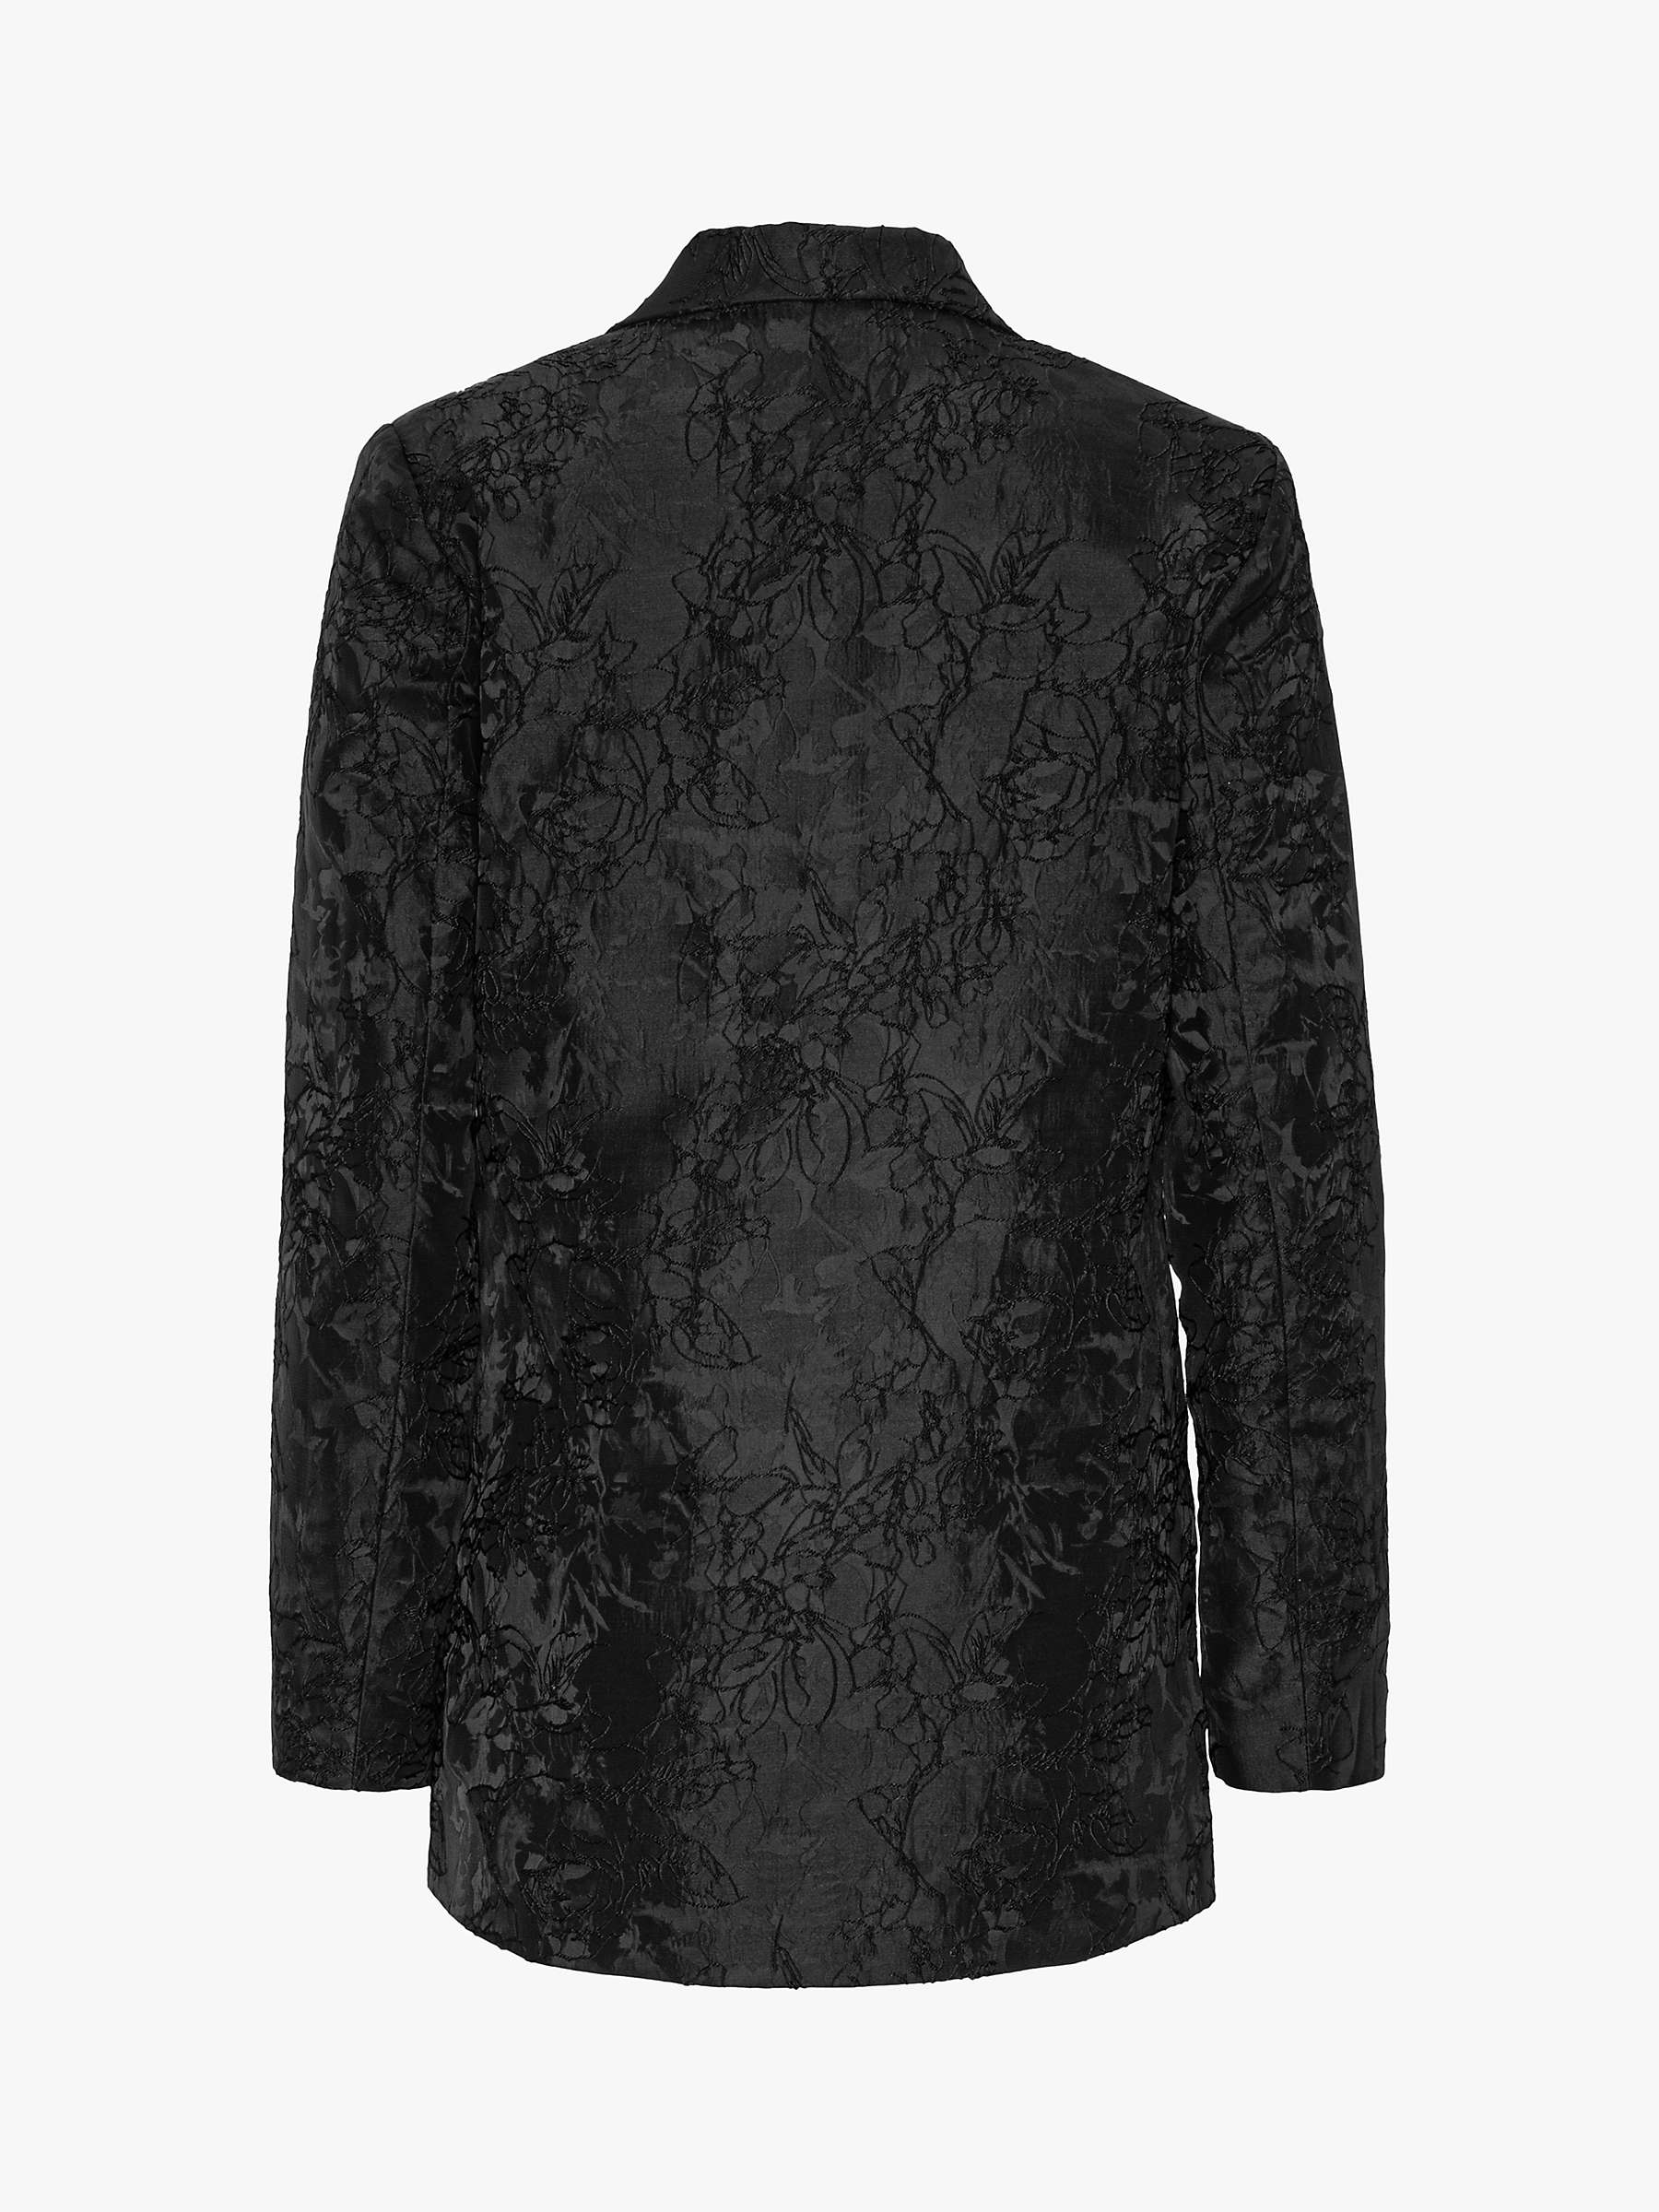 Buy A-VIEW Aria Double Breasted Blazer, Black Online at johnlewis.com